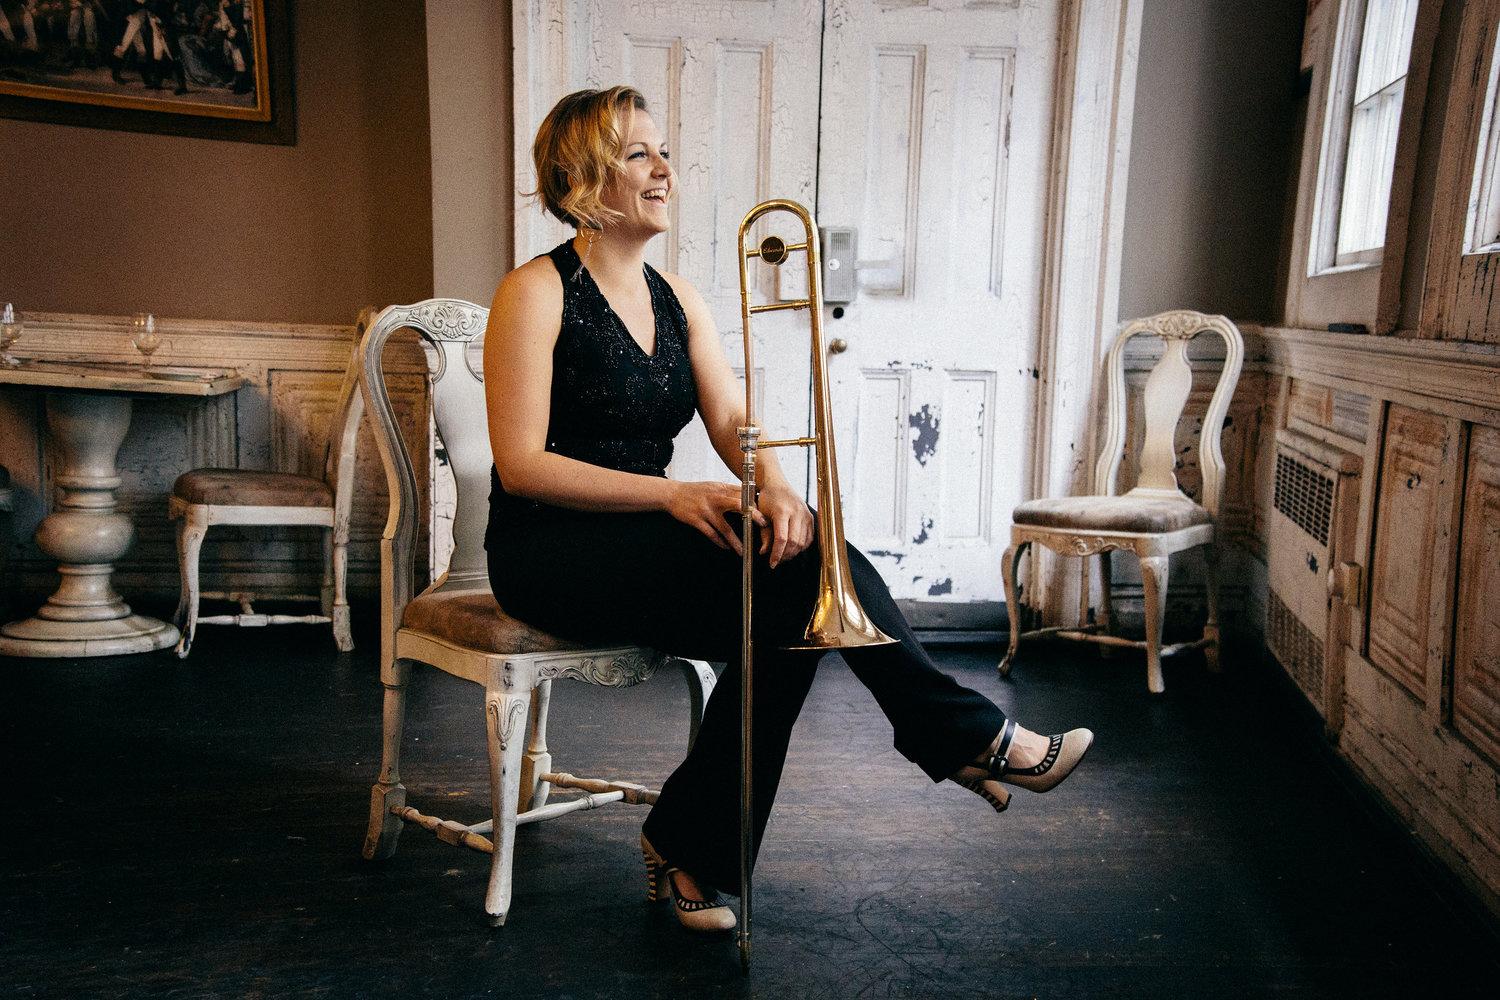 A person wearing a fancy, modern outfit sitting in a chair in a distressed, Victorian style room, holding a trombone and laughing joyfully